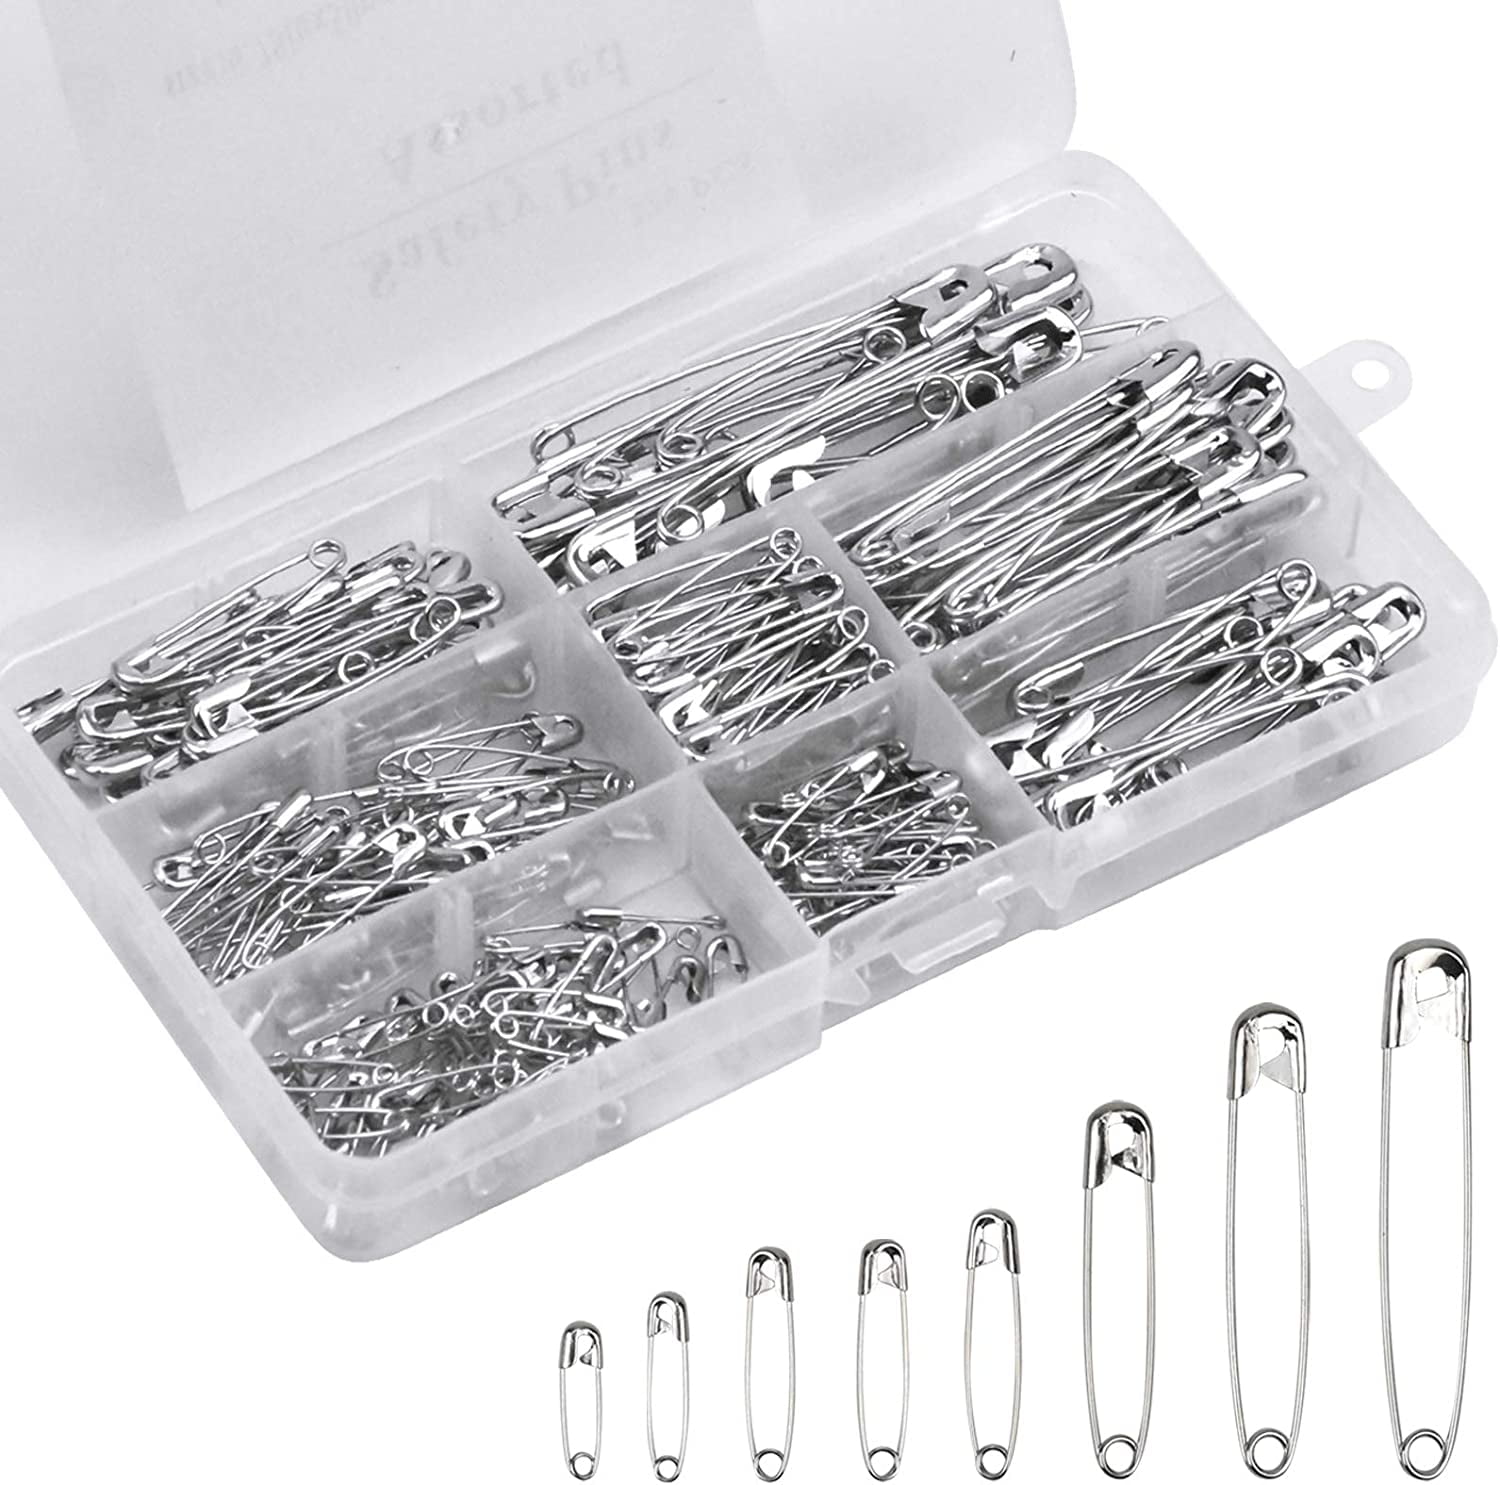 8 Sizes Metal Clothing Pins Small Medium Large Nickel Plated Pins with Plastic Box for Art Craft Clothing Tags Quilting Sewing Home Office Use Silver 270Pcs Assorted Safety Pins Set 